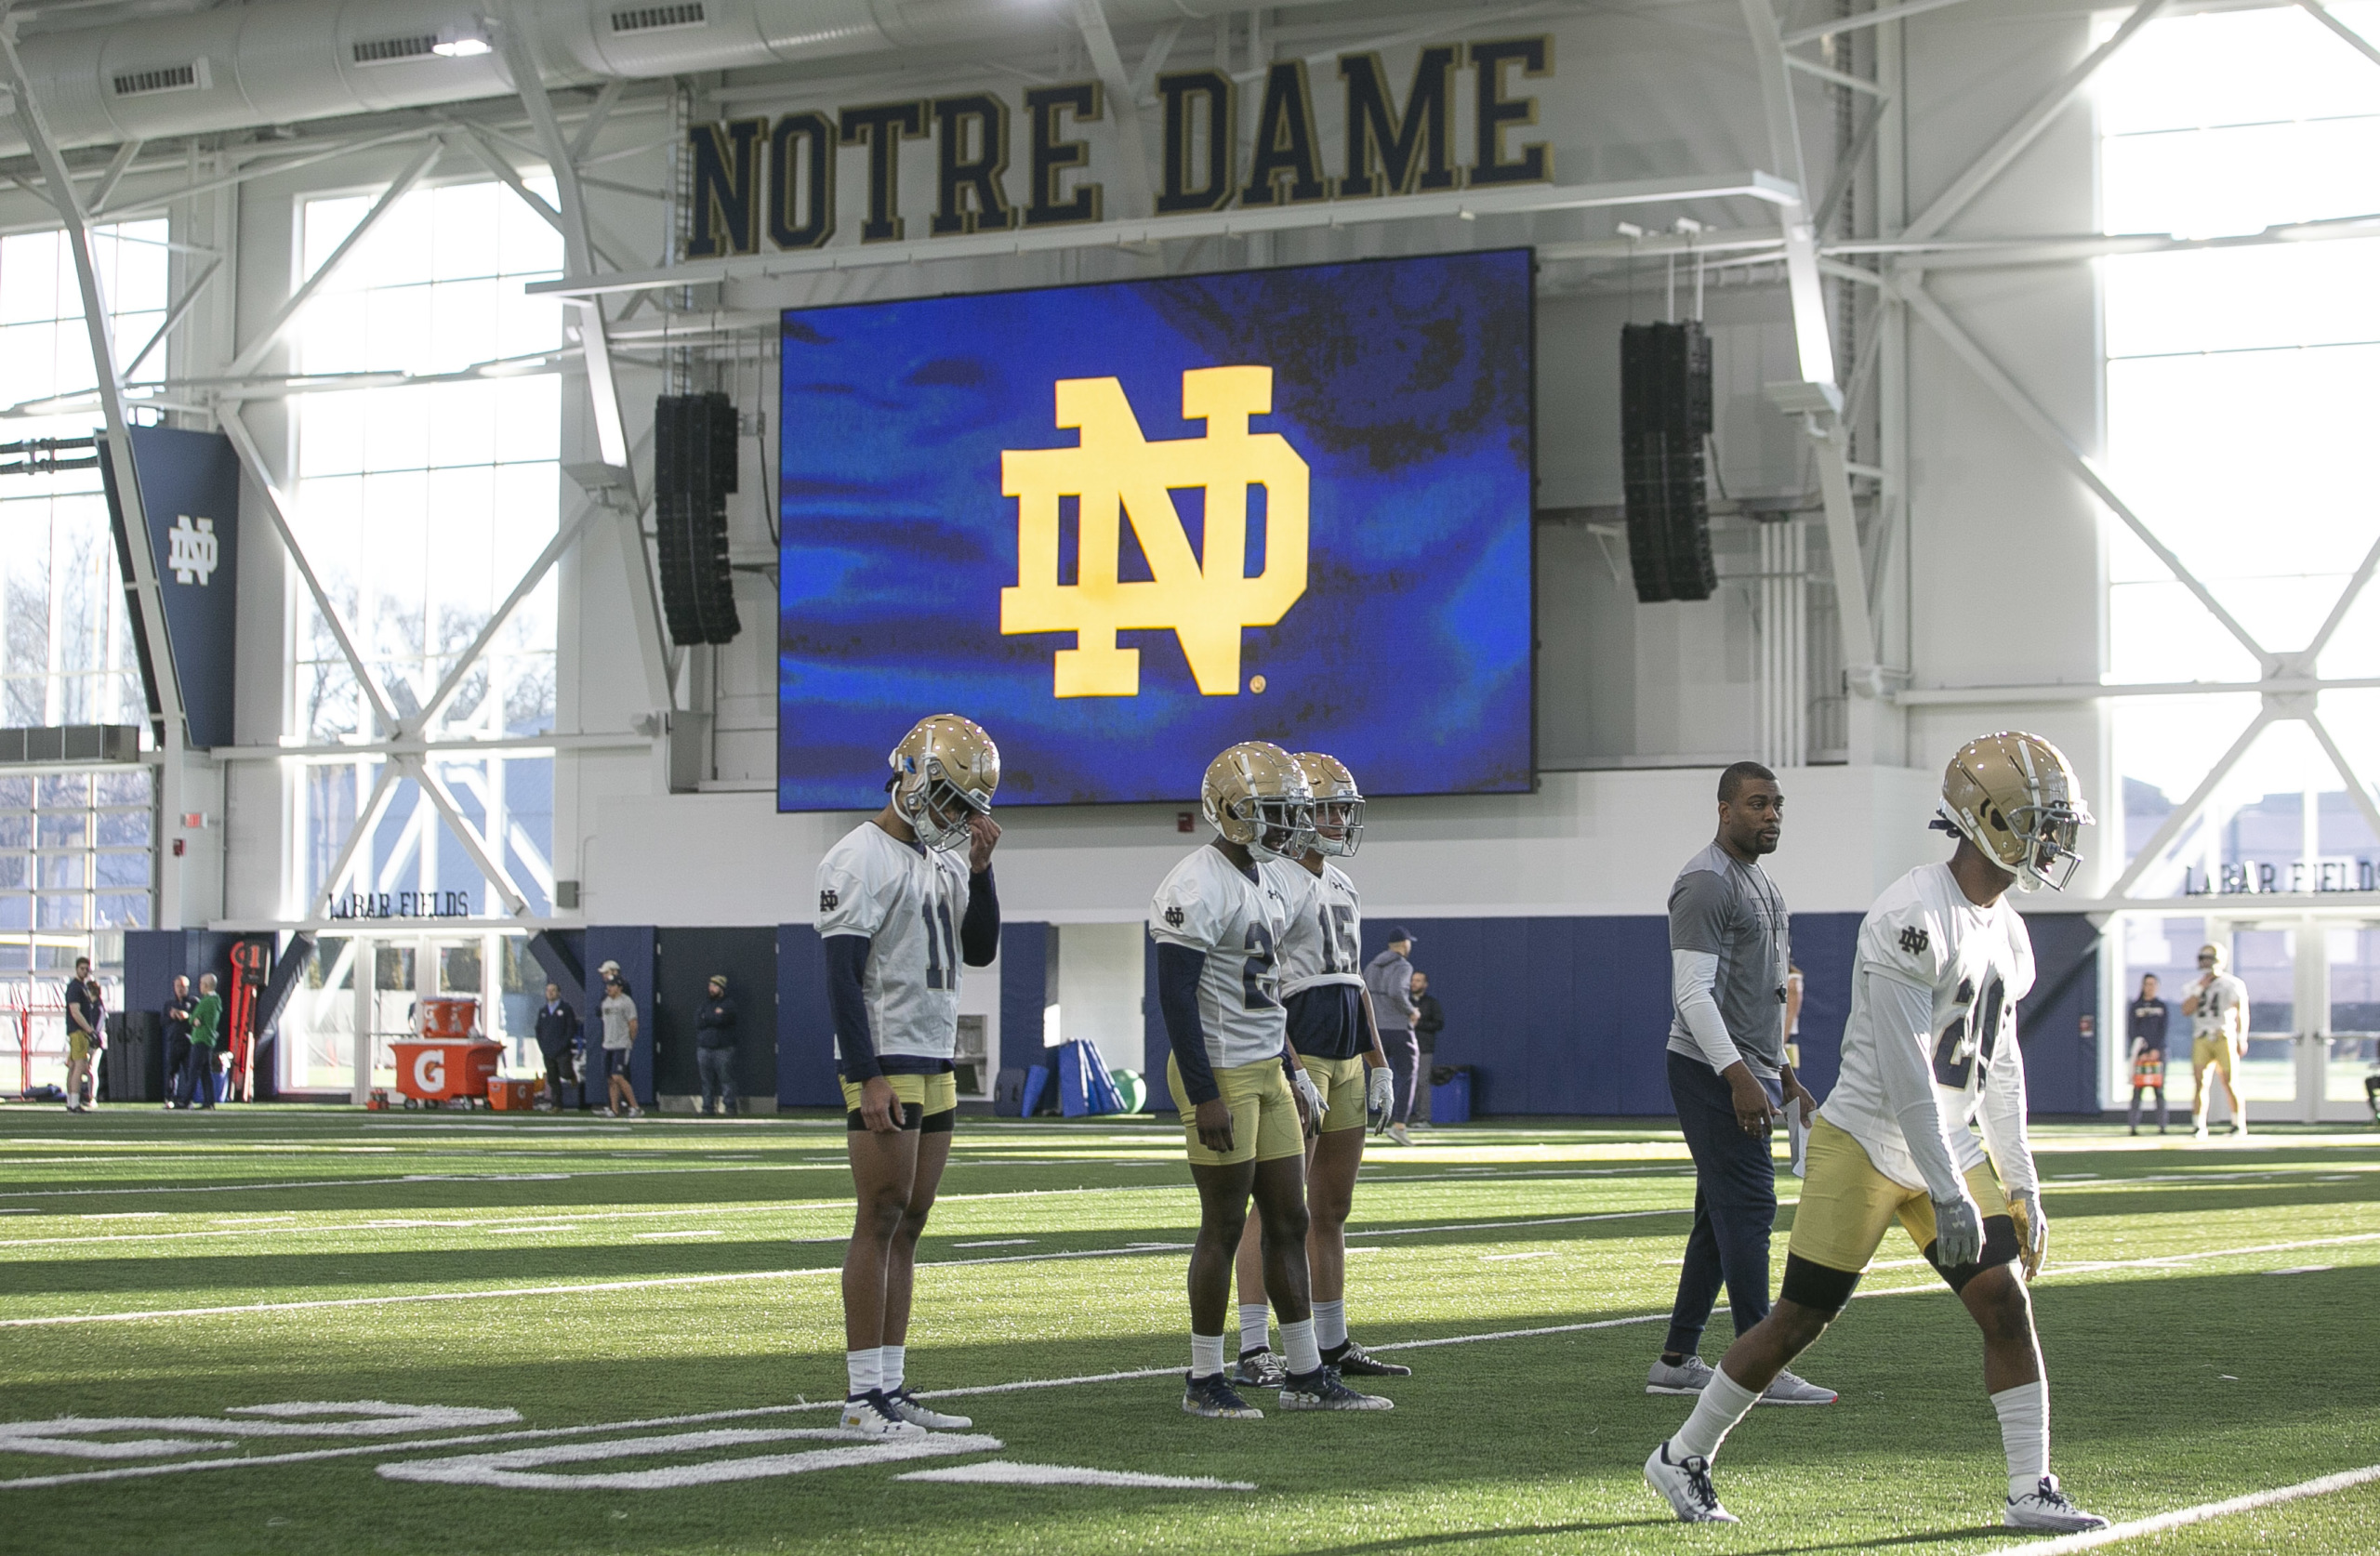 Notre Dame Football to Join ACC for 2020 Season, Share NBC Revenue